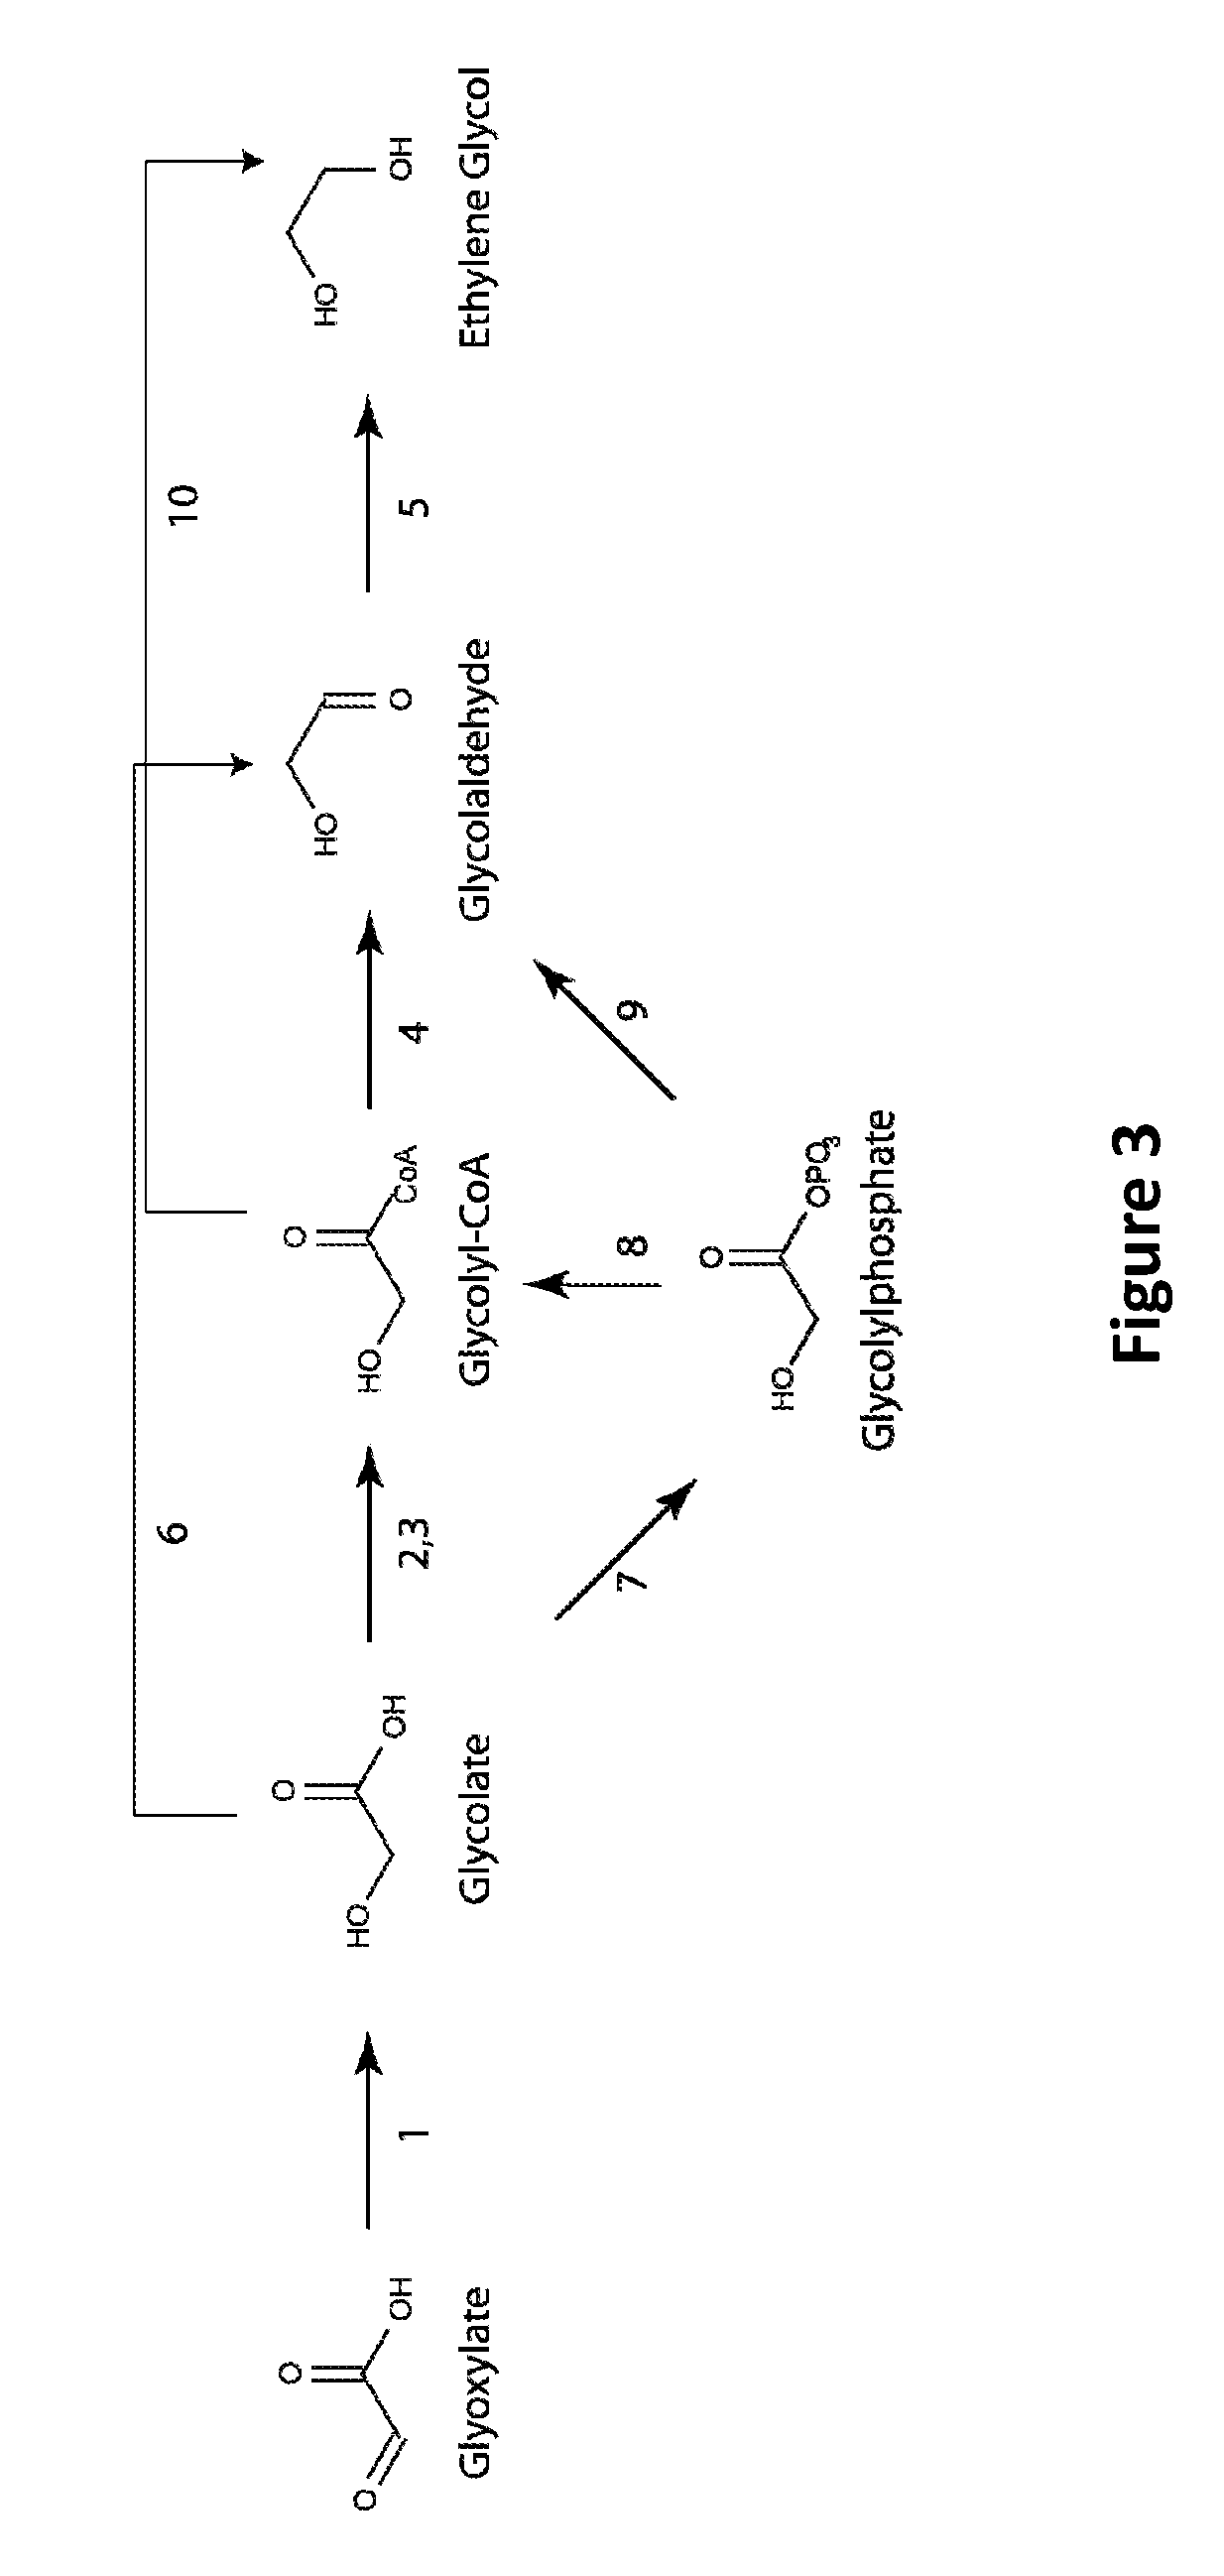 Microorganisms and methods for the production of ethylene glycol